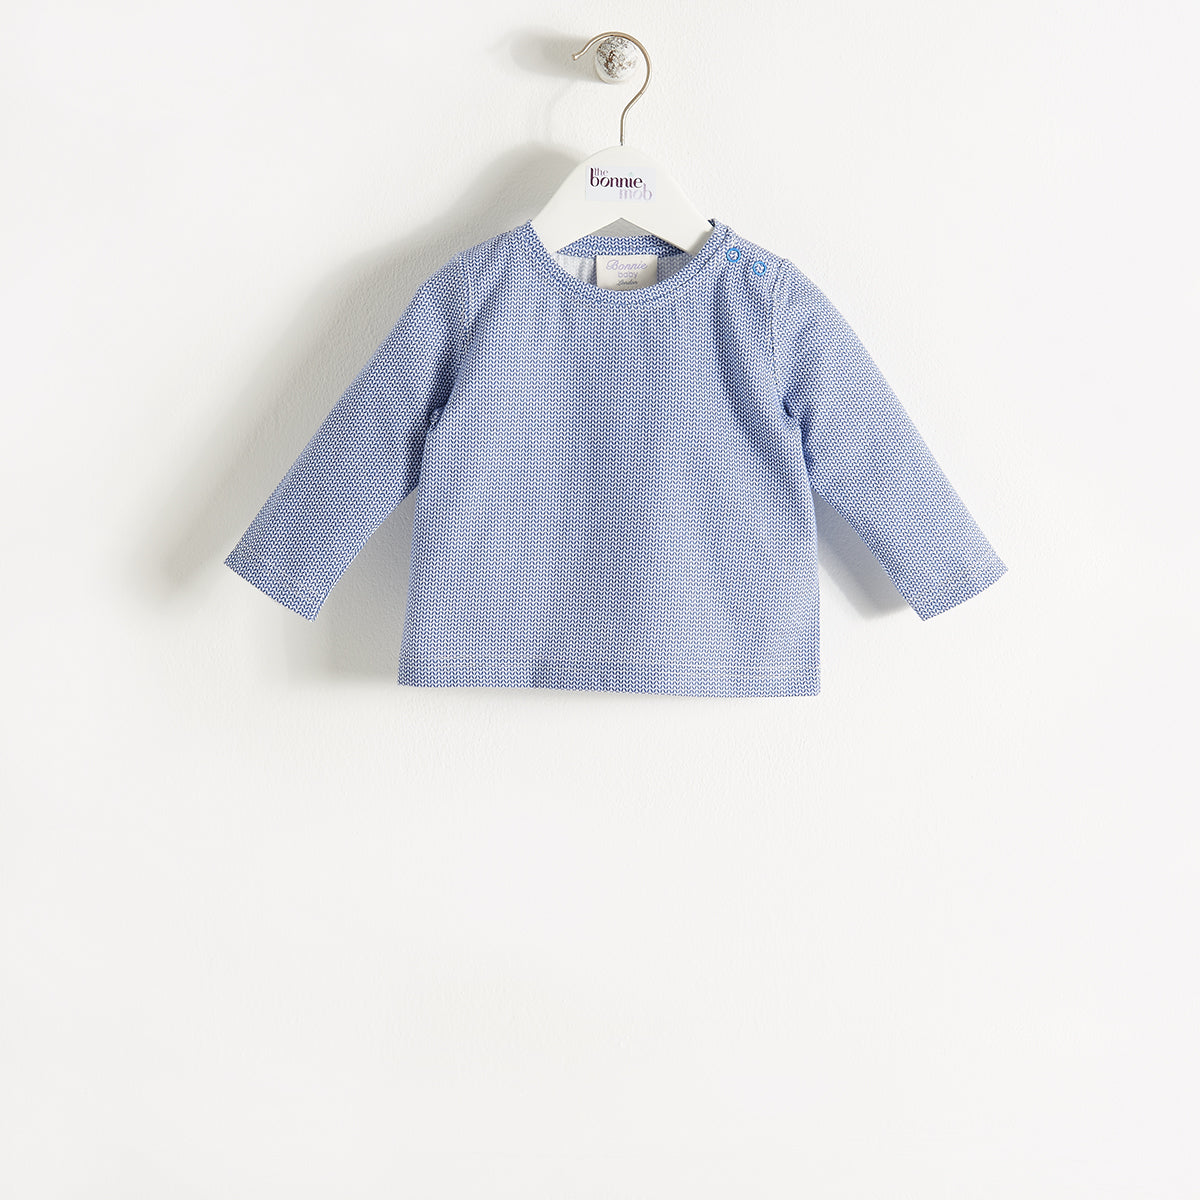 T-SHIRT - BABY - 3 COLOR (BLUE/PINKS/GREY) - BARNEY